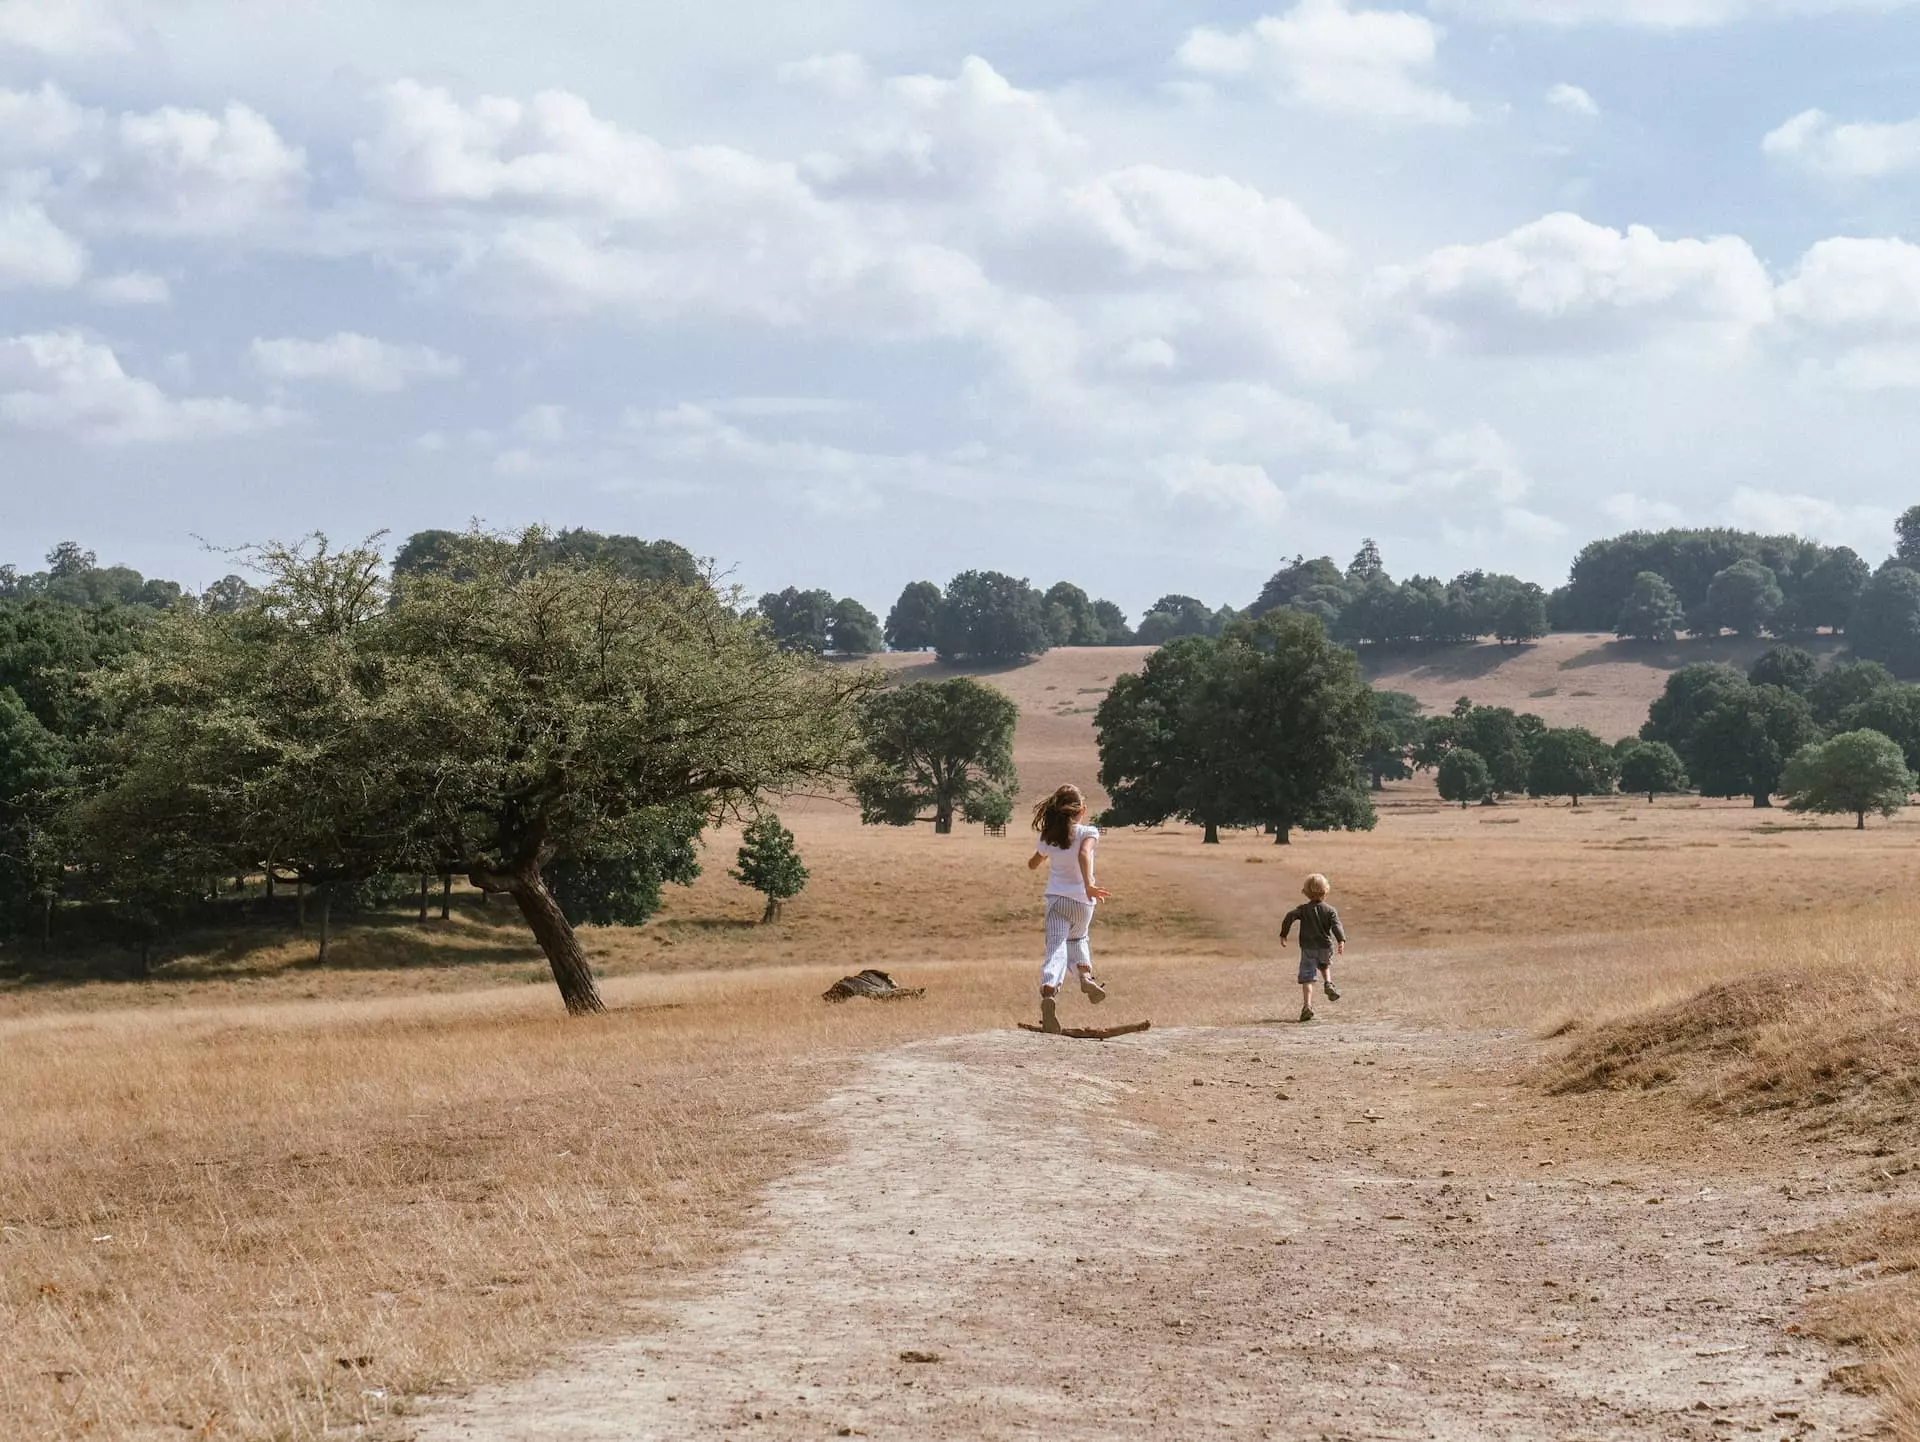 a woman and boy running on a dirt path in a field